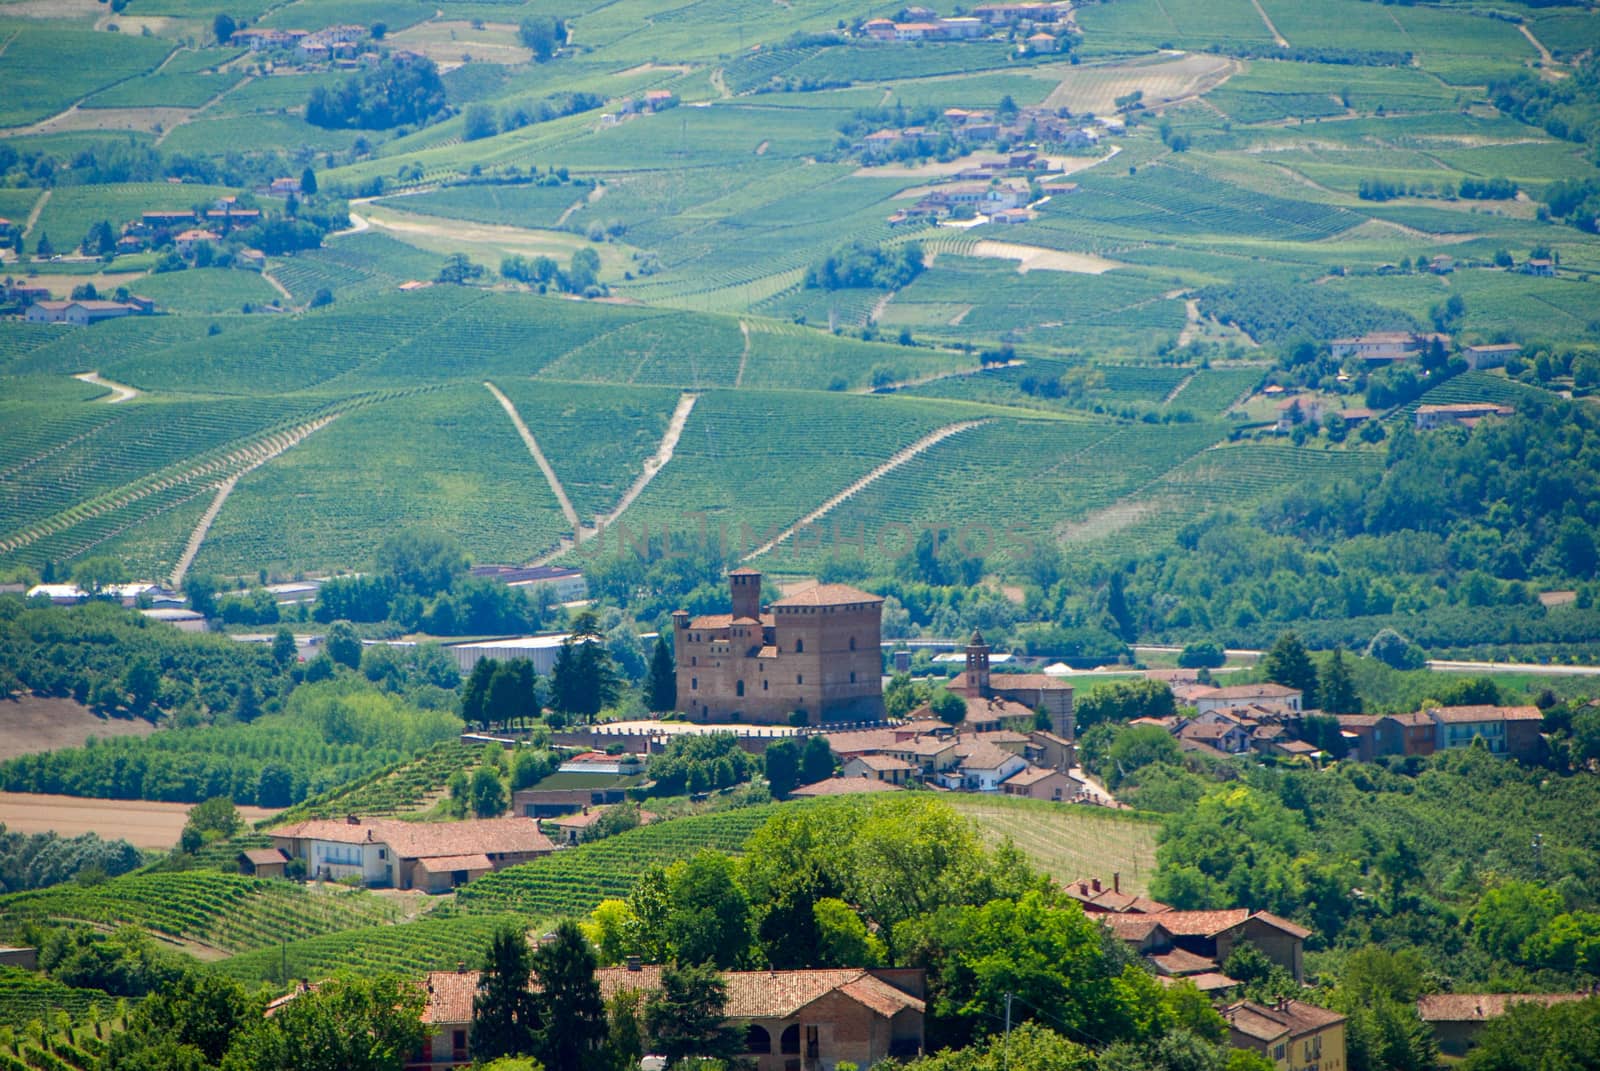 The hills of Langhe with the Castle of Grinzane Cavour, Piedmont - Italy